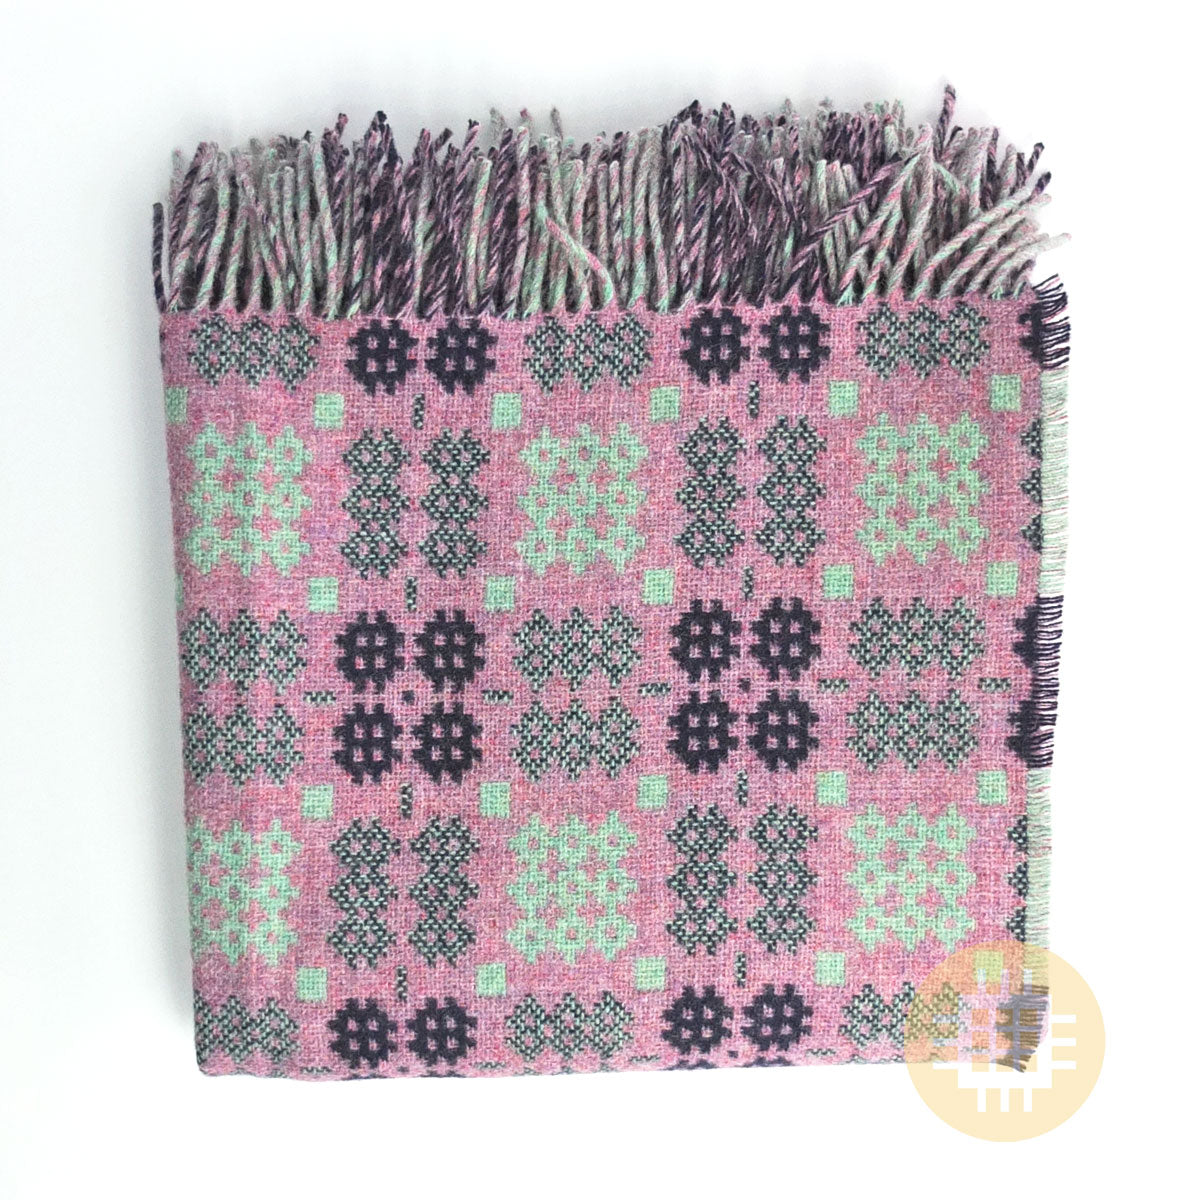 Amaranth Welsh Tapestry Blanket - made in Wales